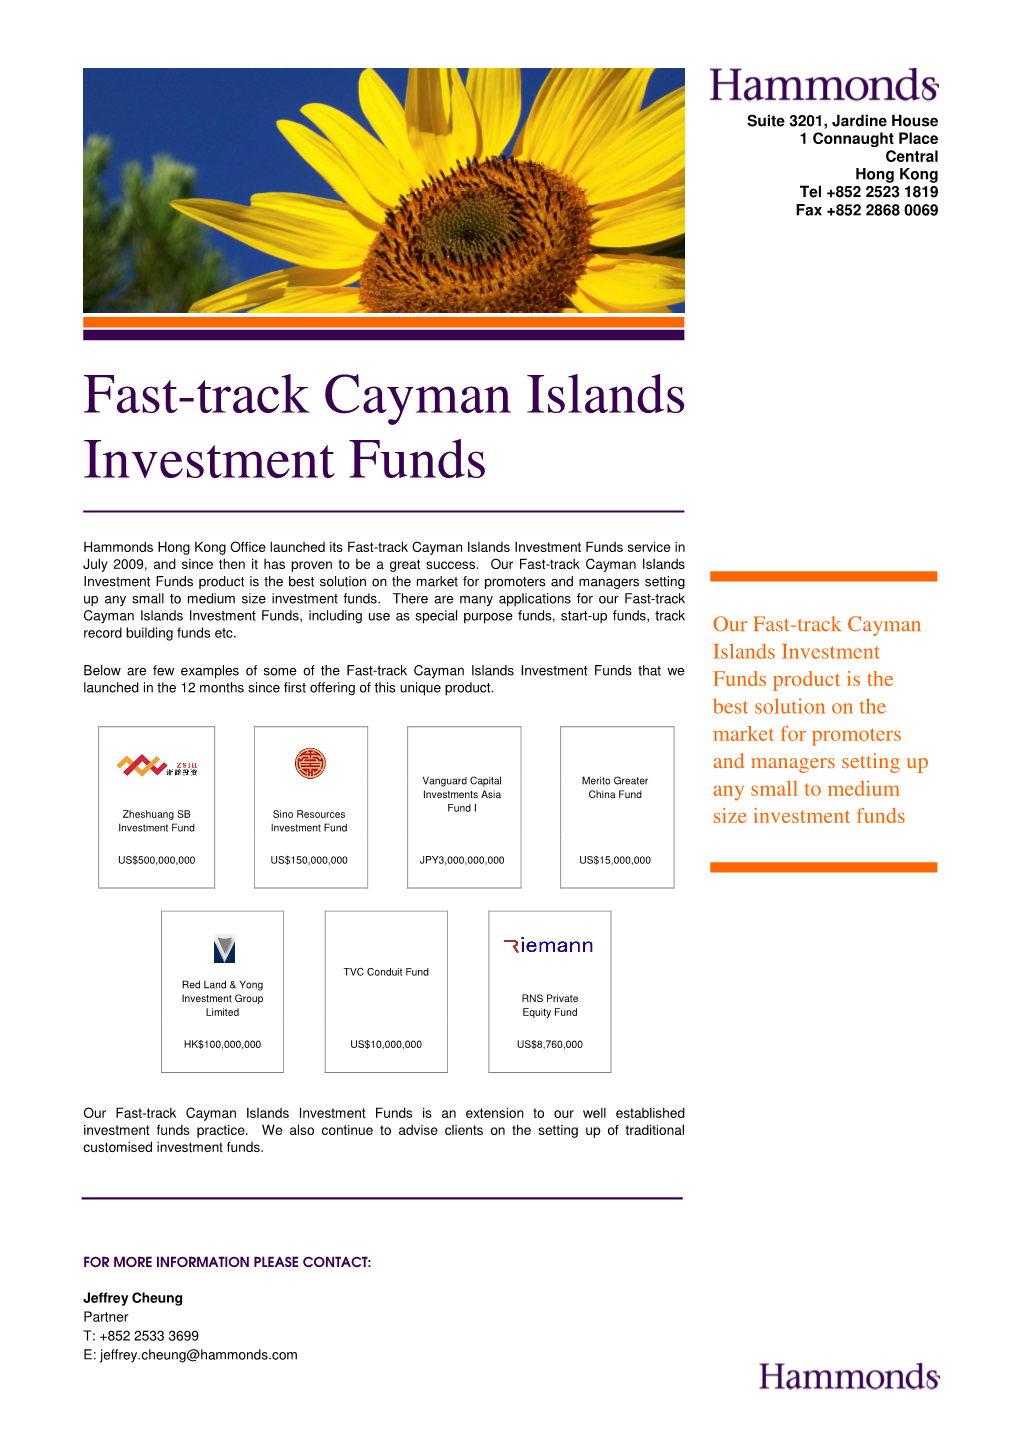 Fast-Track Cayman Islands Investment Funds